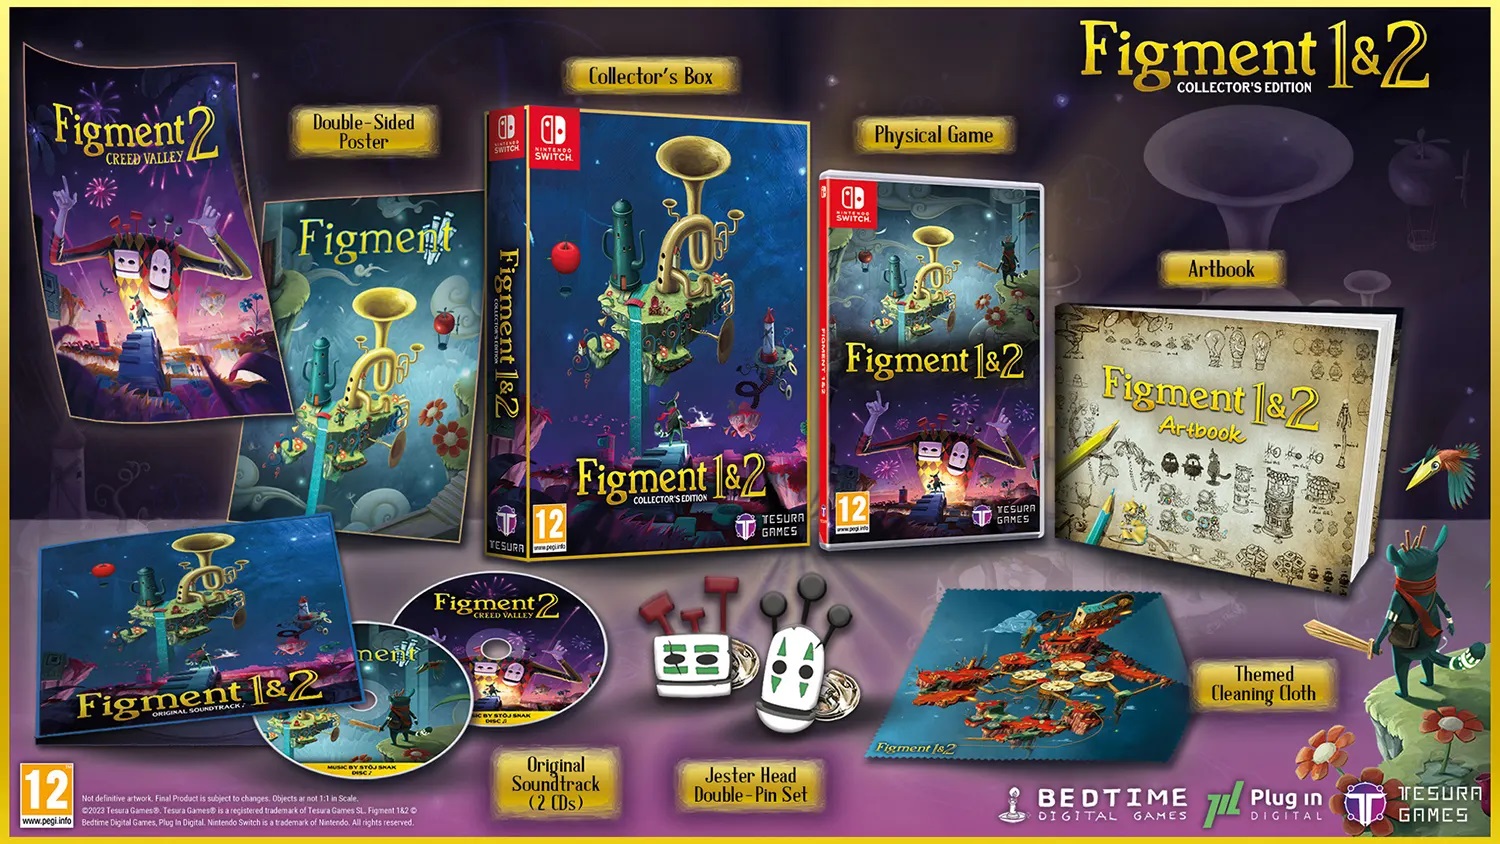 Figment 1+2 Collector's Edition